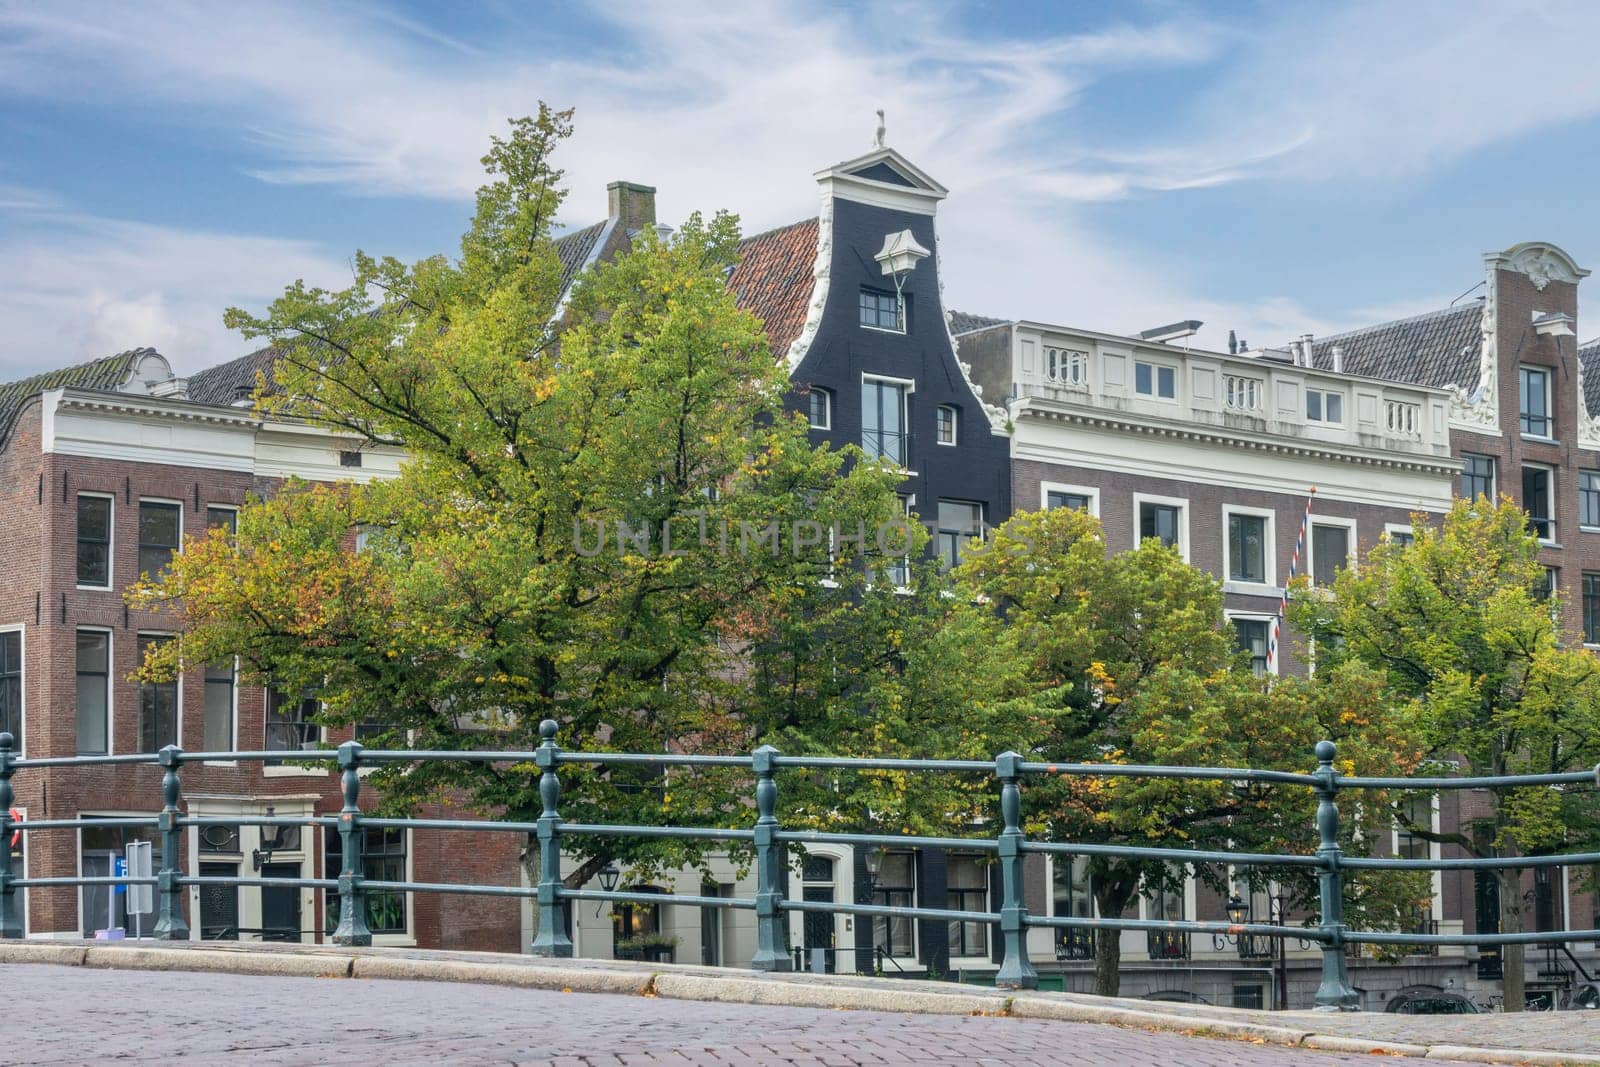 Netherlands. A day in Amsterdam. Facades of typical buildings on the canal embankment. High clouds in the blue sky